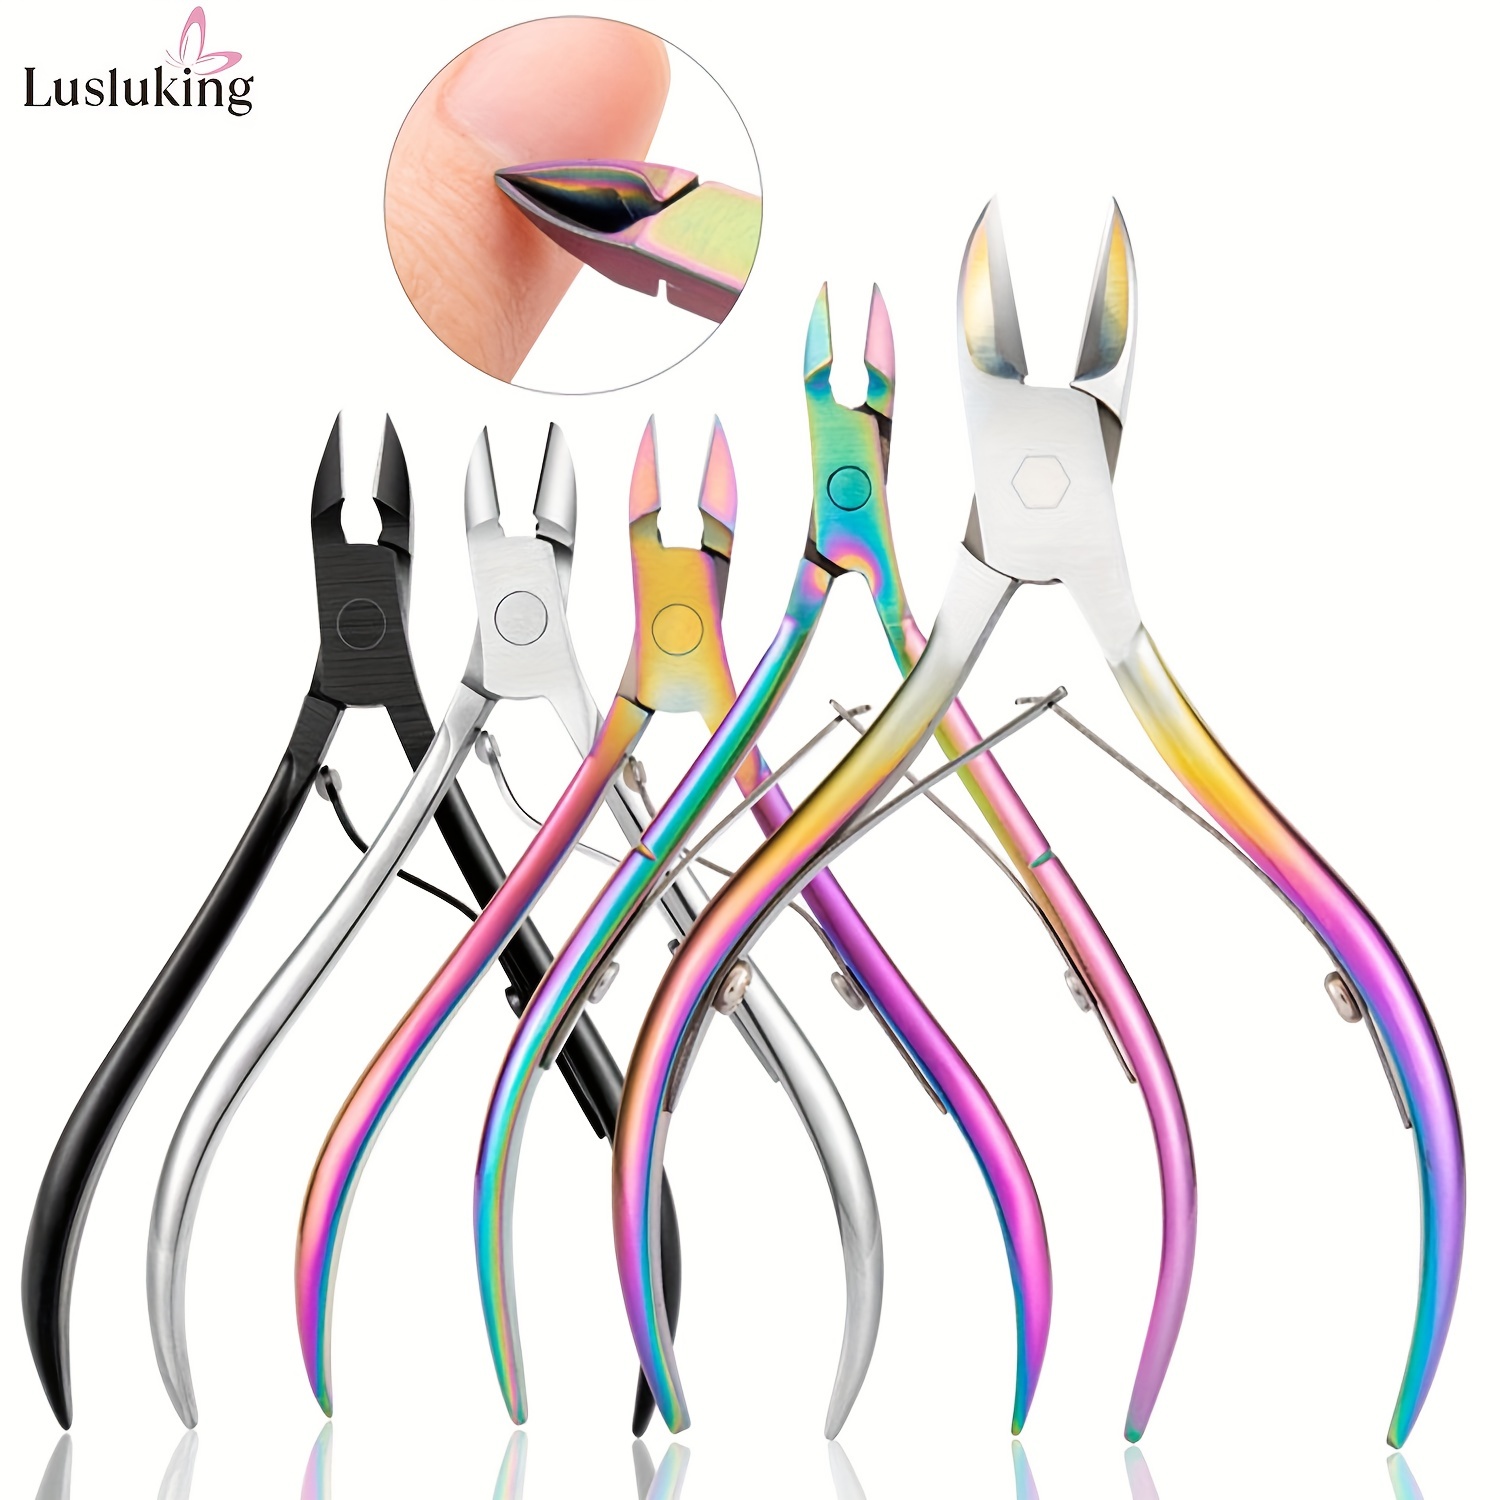 

1pc, Nail Art Cuticle Scissor Nippers Clipper Dead Skin Remover Cut Plier Manicure Stainless Steel Trimming Pedicure Care Tools